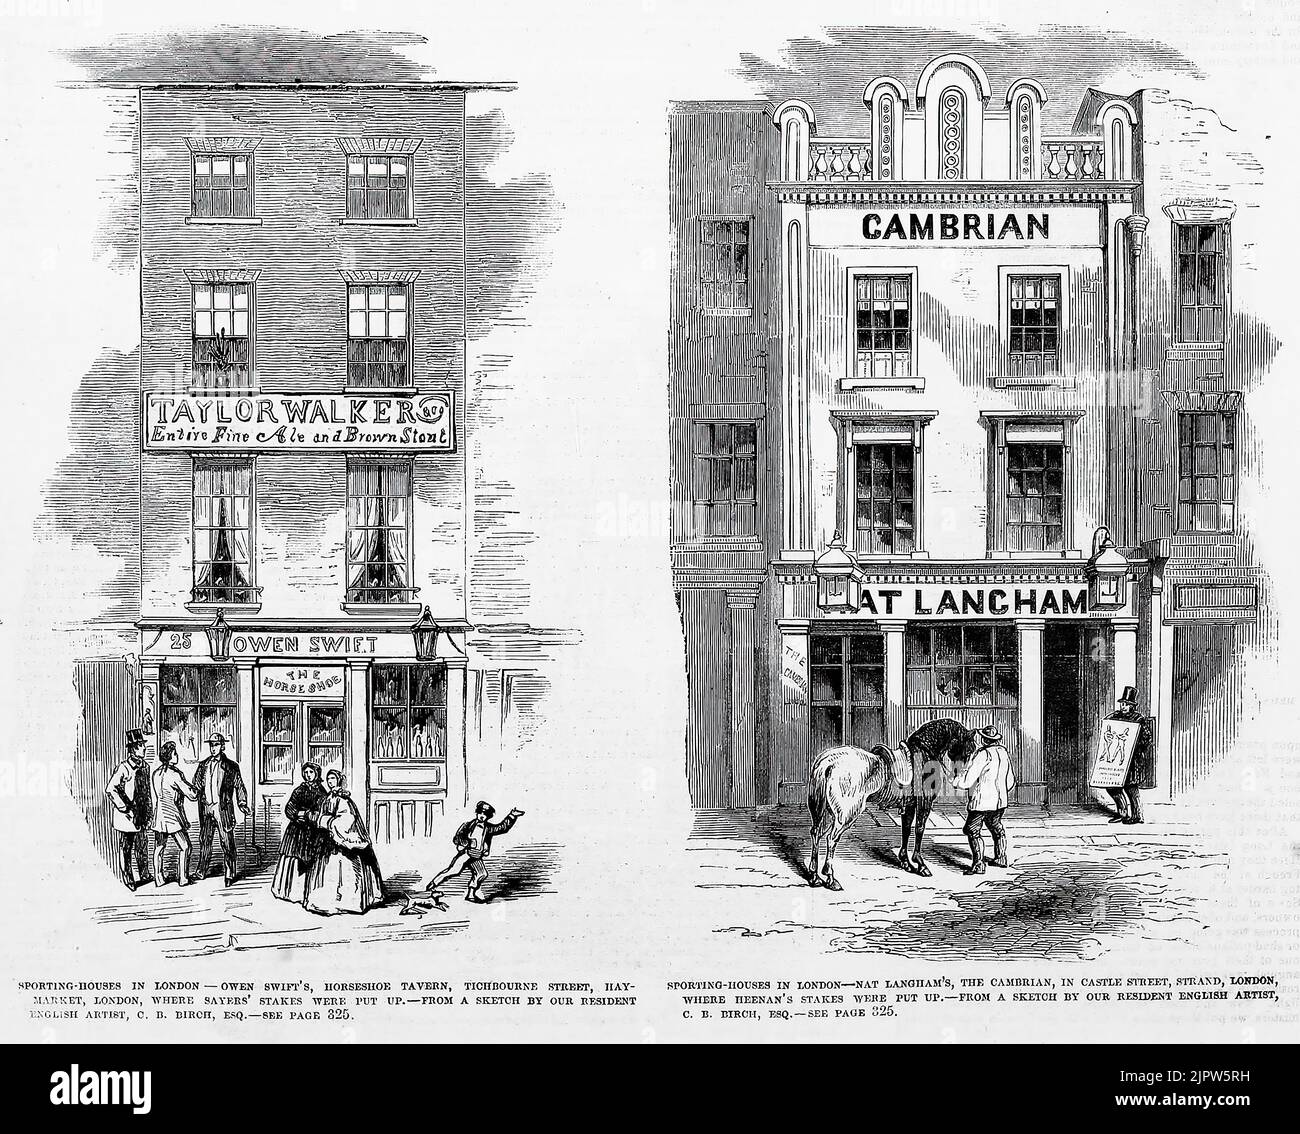 Sporting Houses in London - Owen Swift's, Horseshoe Tavern, Tichbourne Street, Haymarket, London, where Tom Sayers' stakes were put up - Nat Langham's, The Cambrian, in Castle Street, Strand, London, where John C. Heenan's stakes were put up (1860). 19th century illustration from Frank Leslie's Illustrated Newspaper Stock Photo